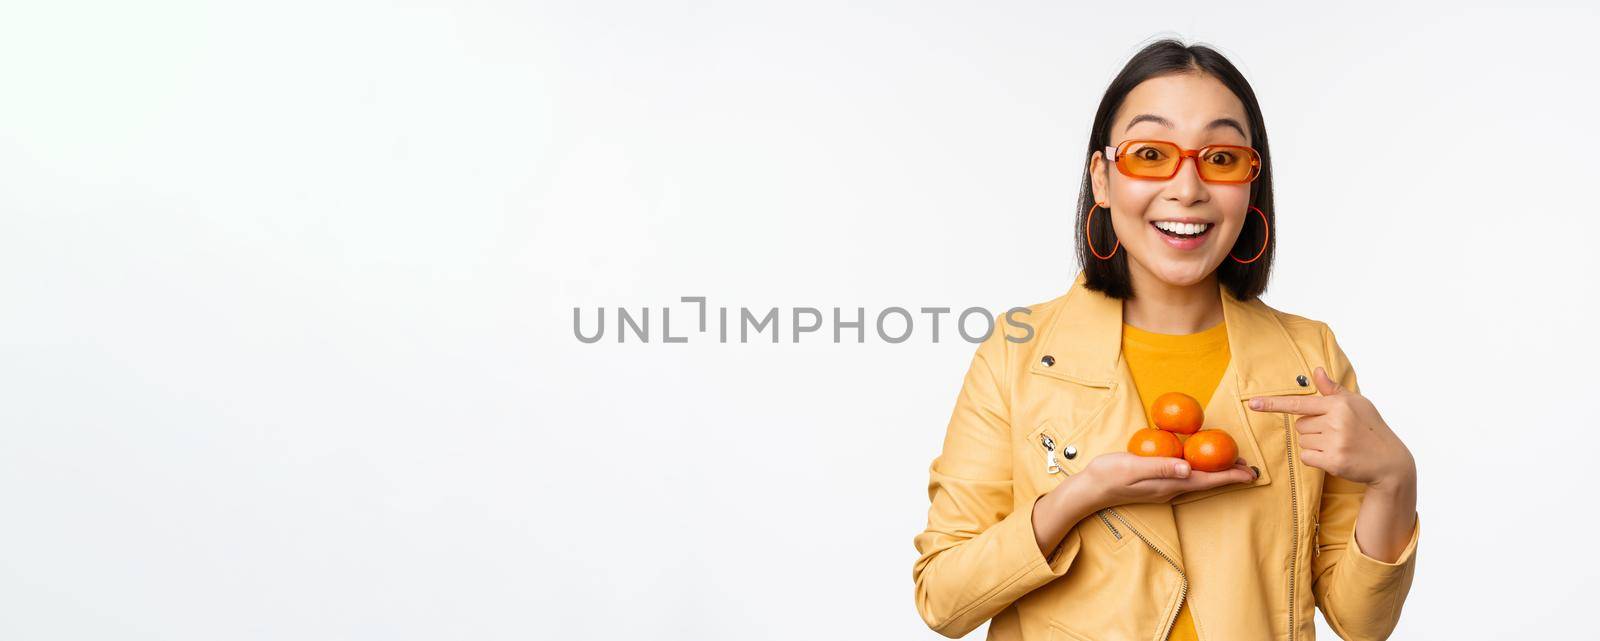 Stylish happy asian girl in sunglasses holding tangerines and smiling, posing against white background. Copy space